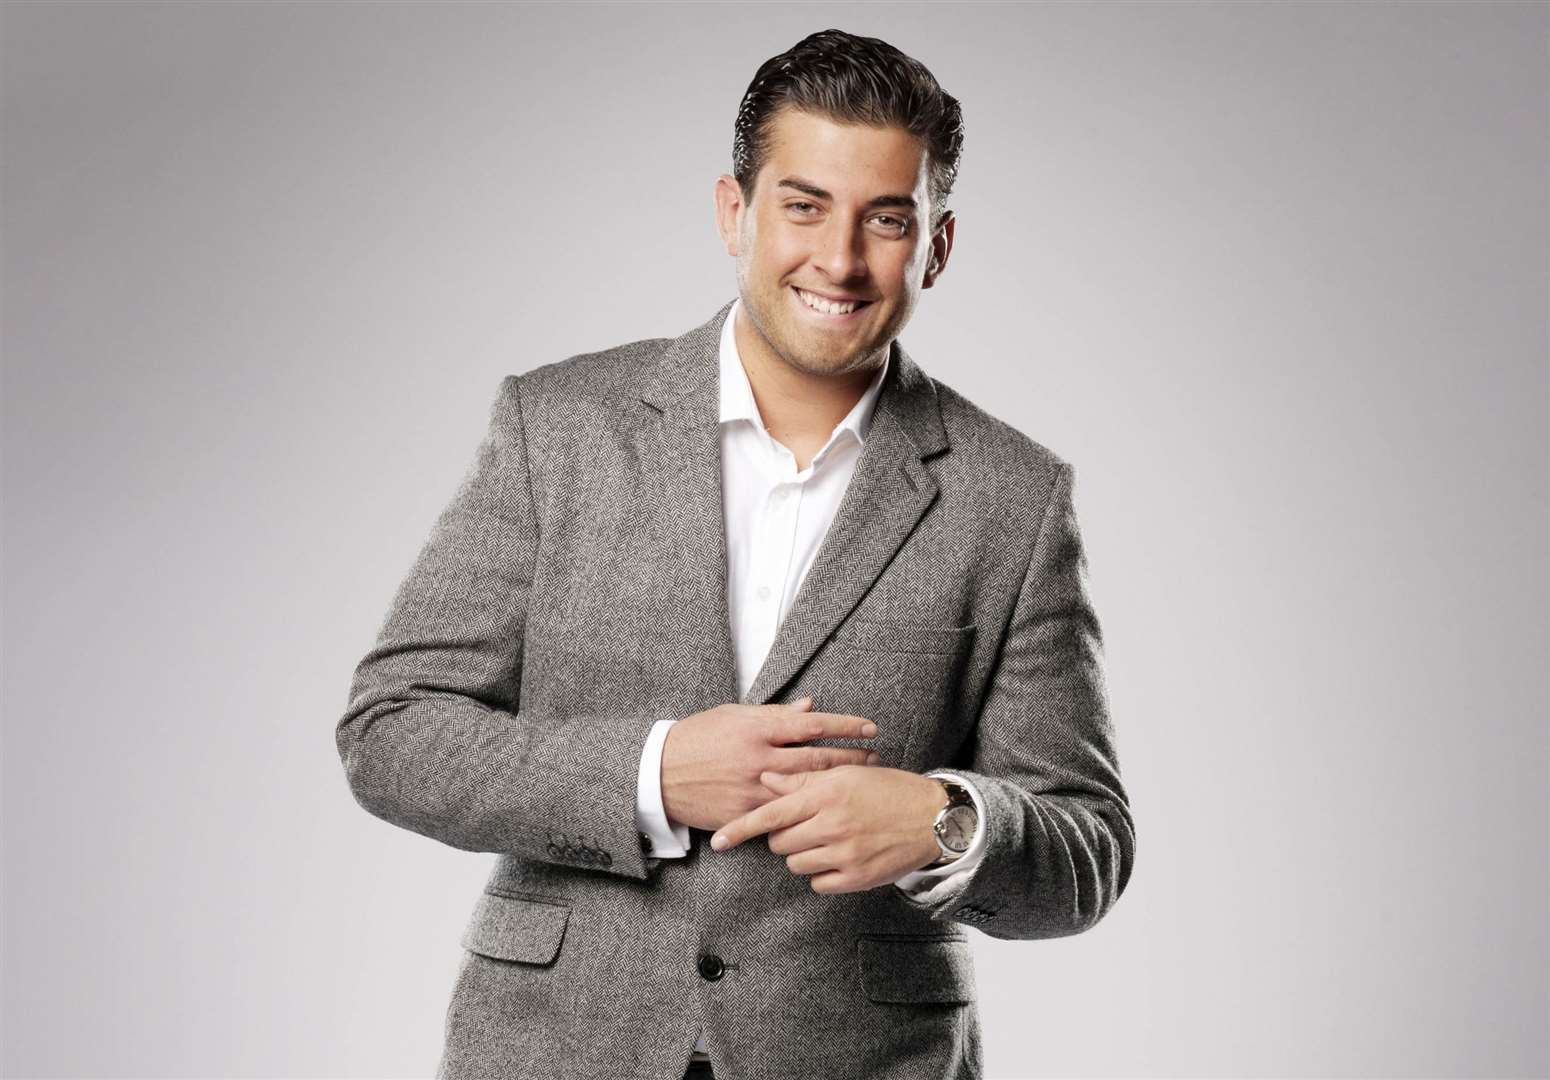 James 'Arg' Argent during the filming of reality TV show TOWIE, for which he became best known